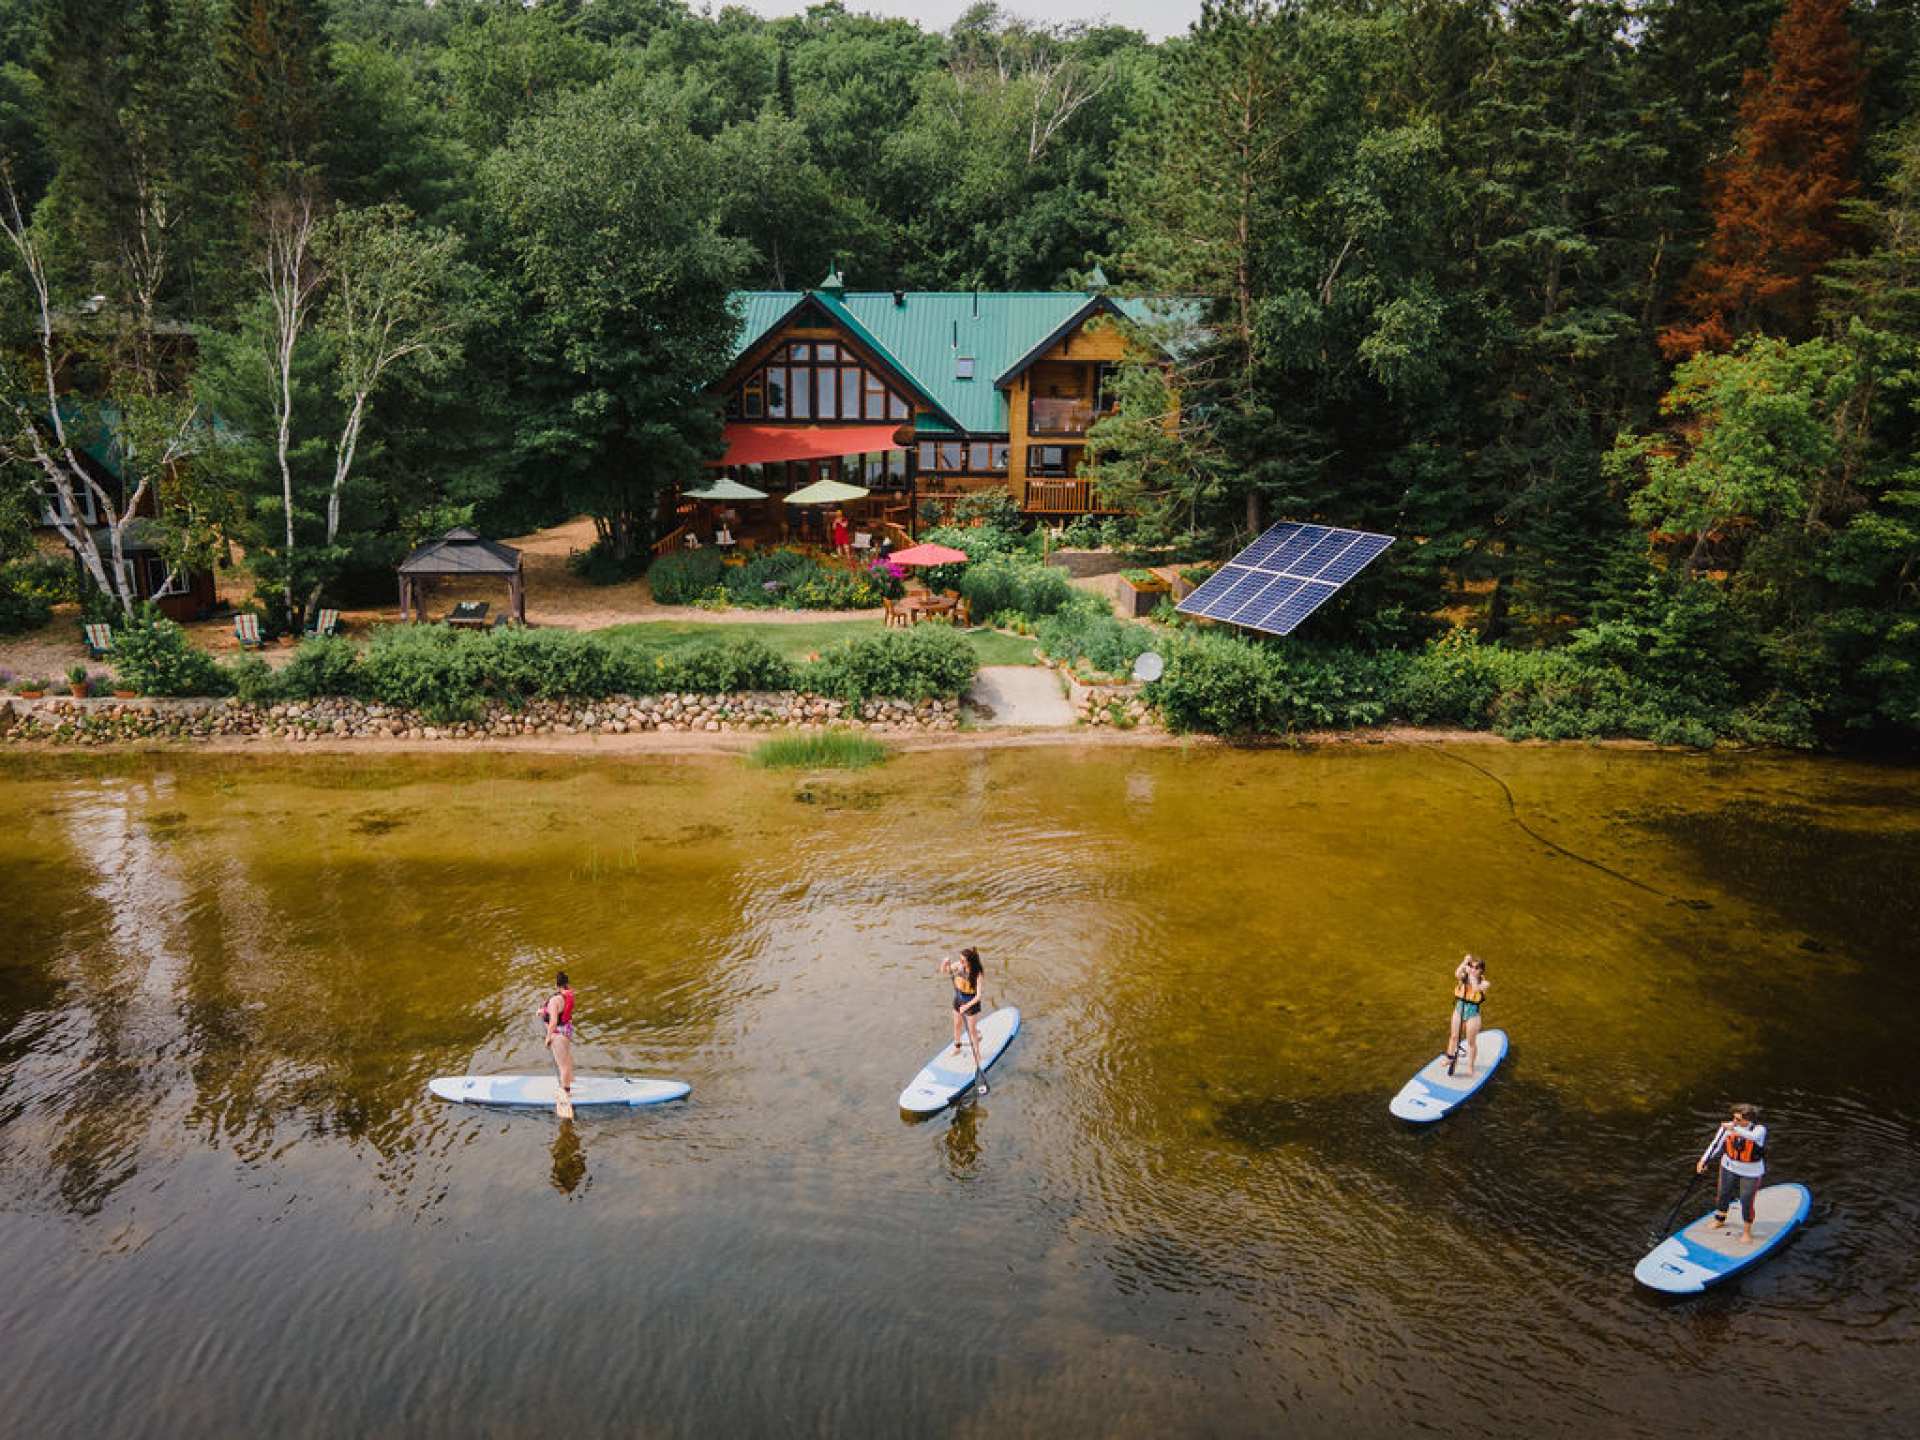 Ontario wellness retreats | Paddle boarders on the lake at Northern Edge Algonquin Ontario wellness retreat